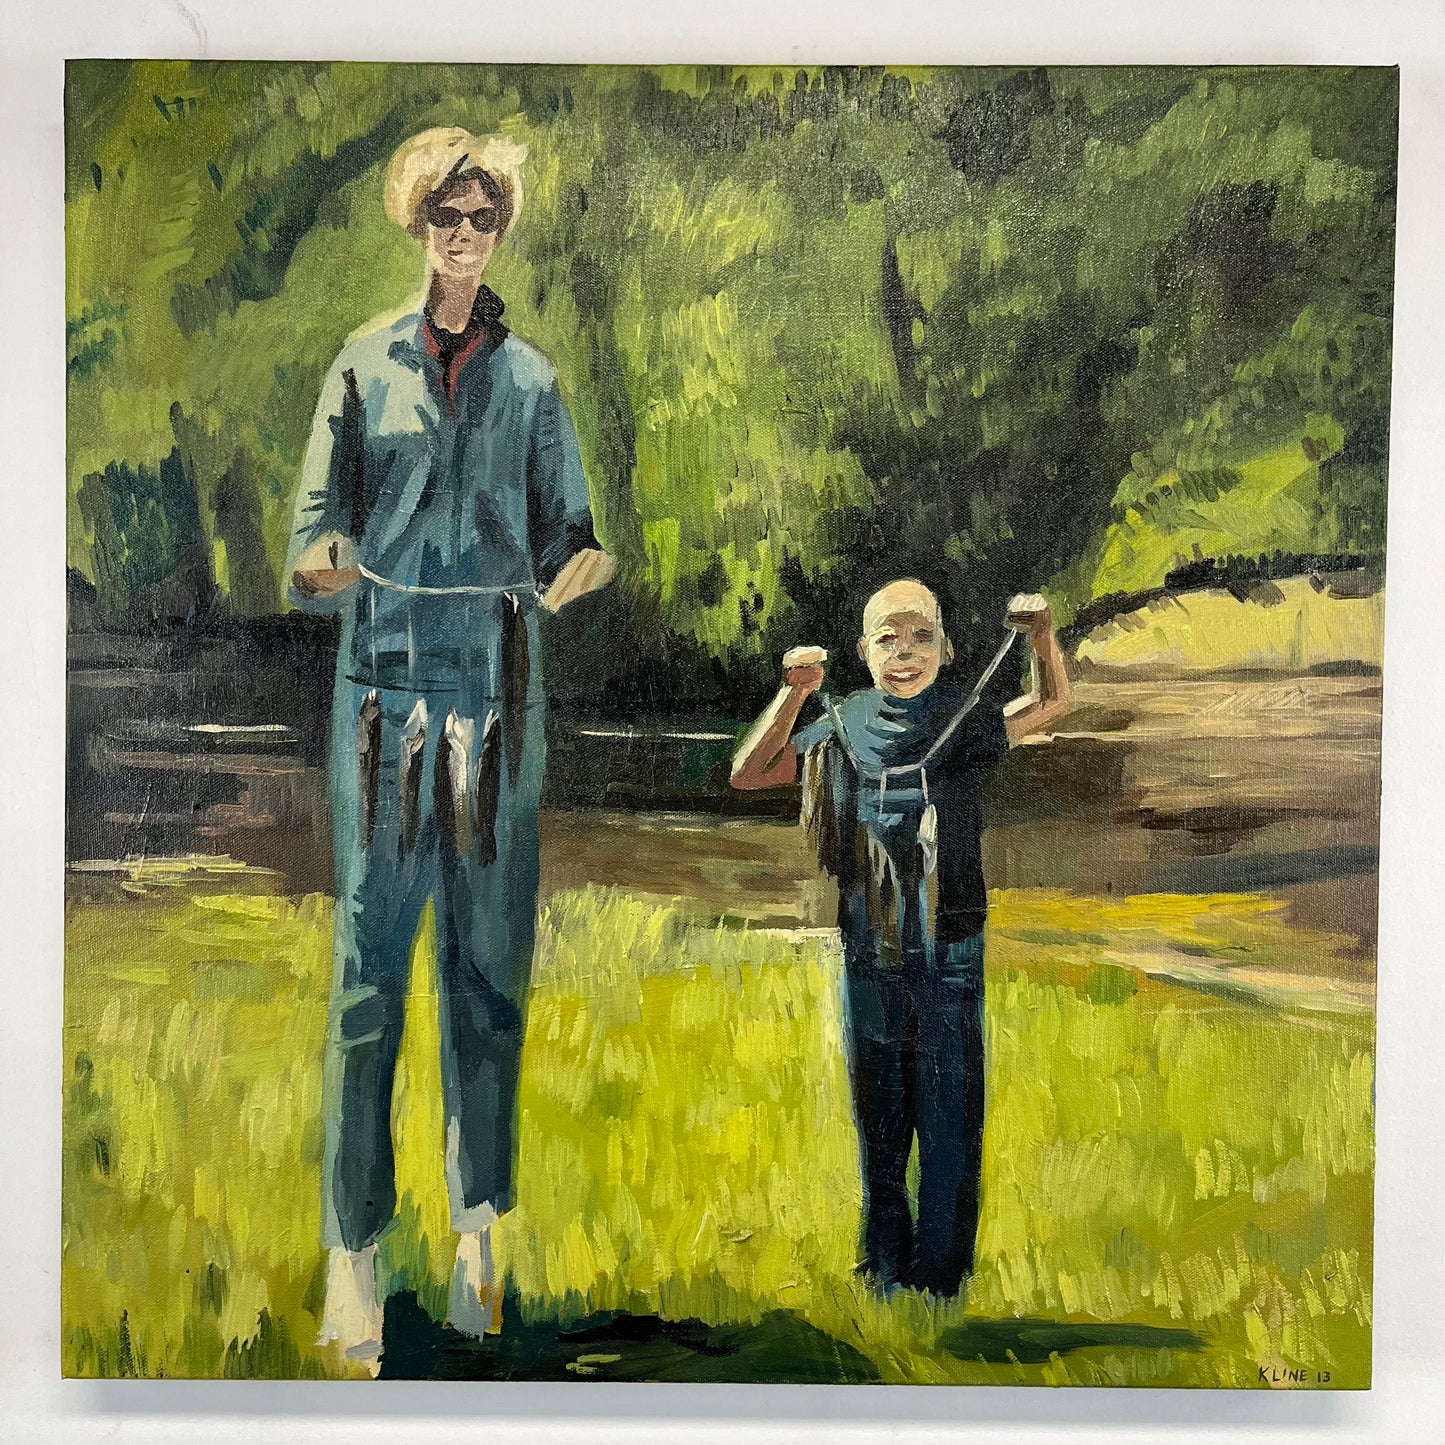 My Mom and Cousin Mike in 1969. Oil on Canvas. 24" x 24" x 1.5". John Kline Artwork.